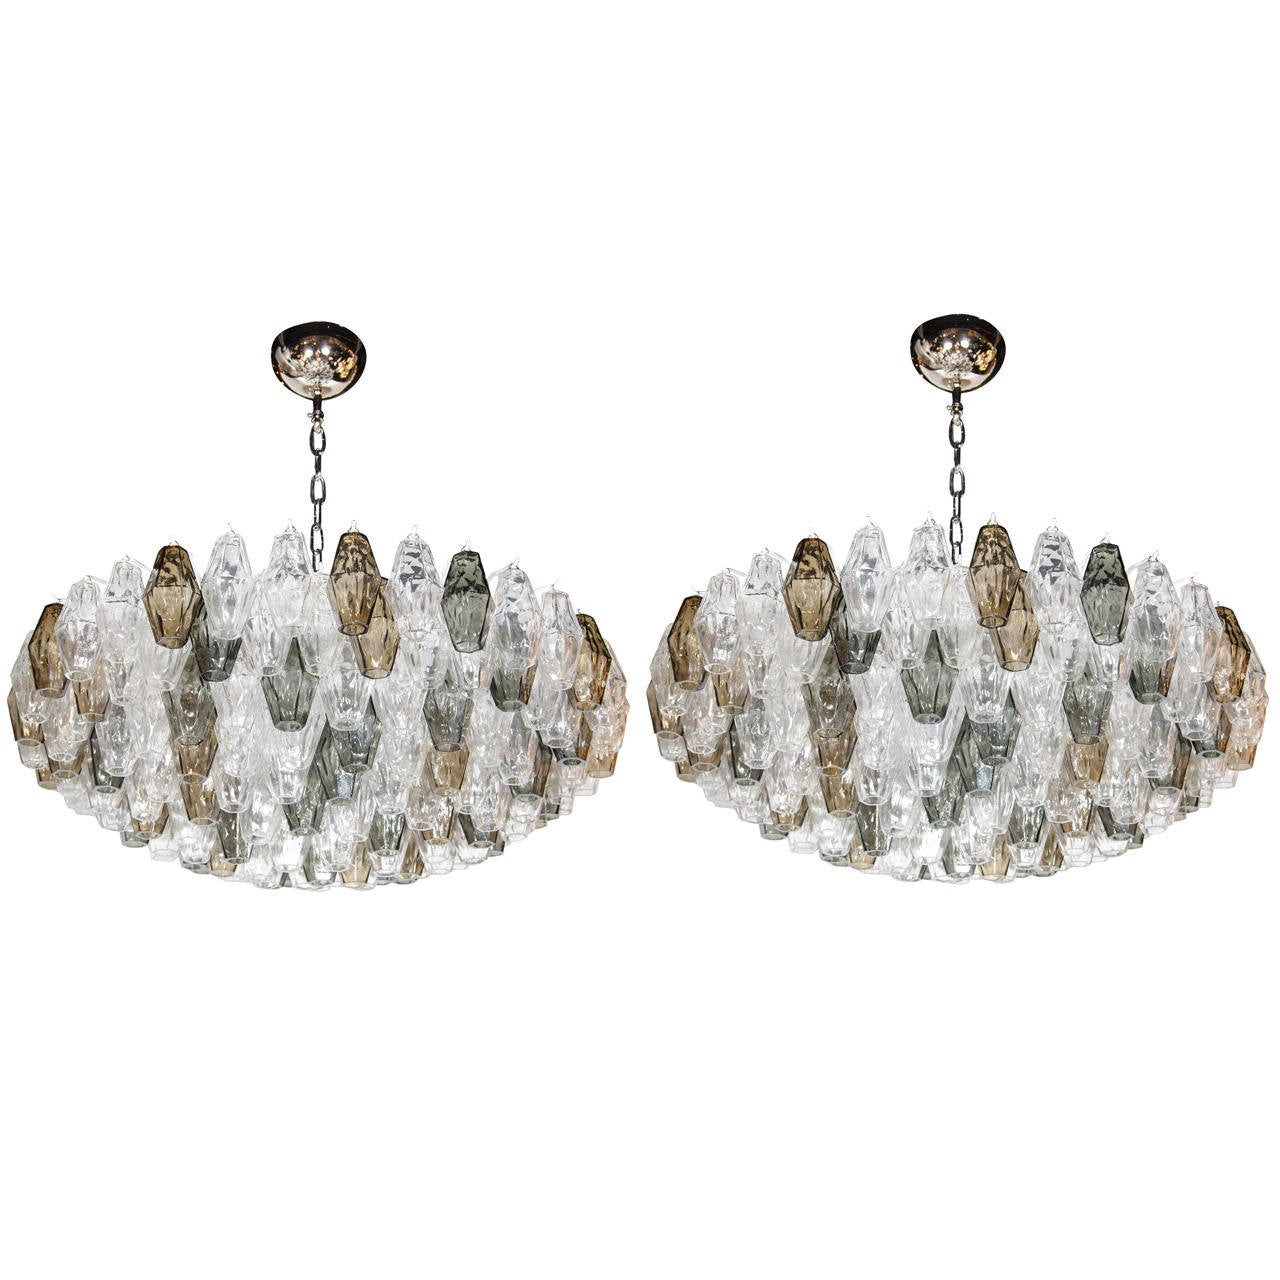 Pair of Spectacular Handblown Murano Glass Polyhedral Chandeliers by Venini